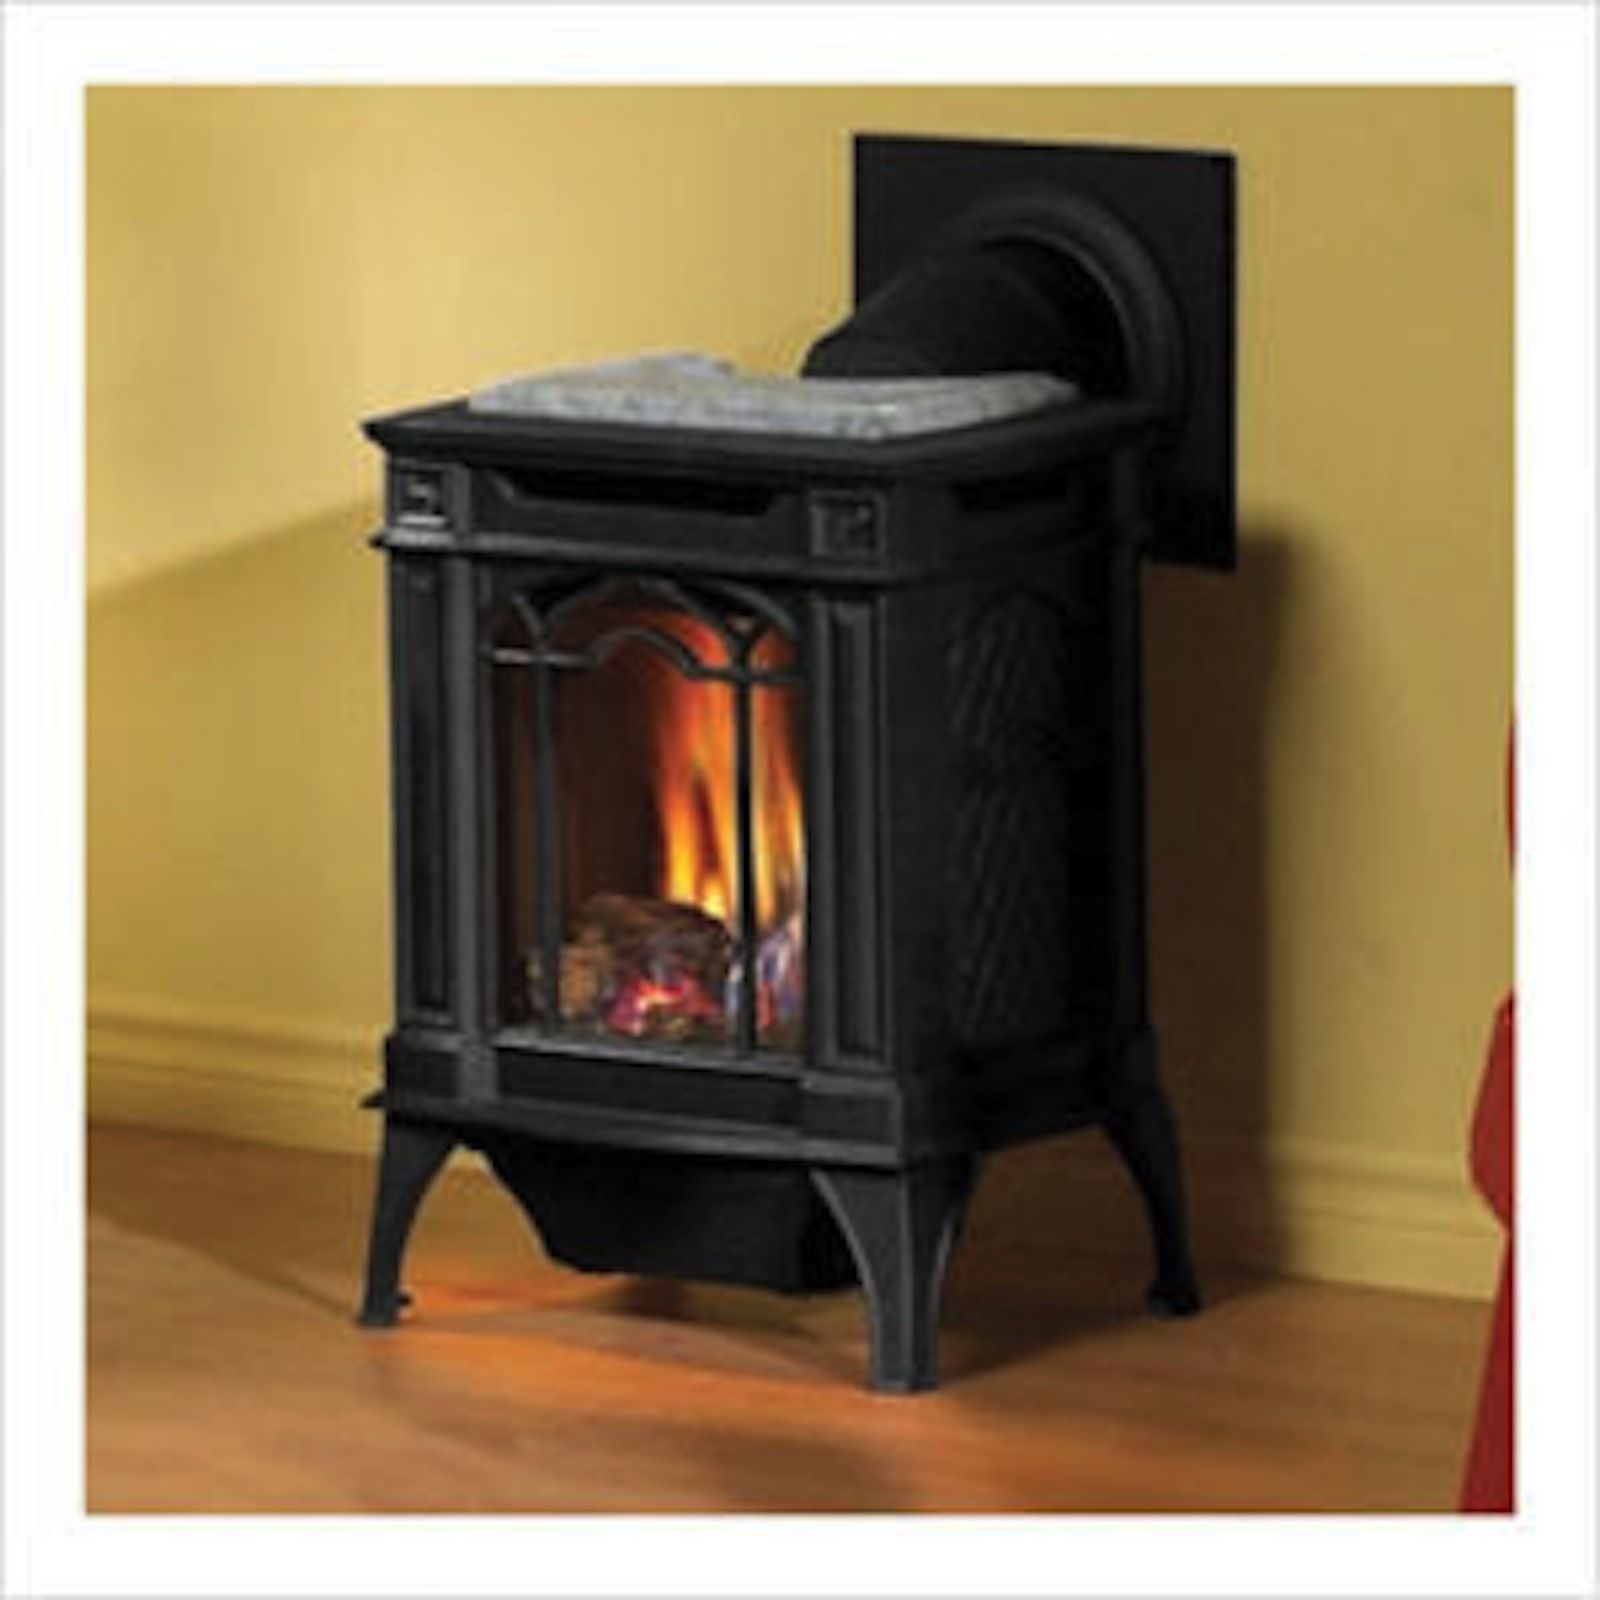 Majestic Gas Fireplace Troubleshooting New Propane Fireplace Problems with Propane Fireplace